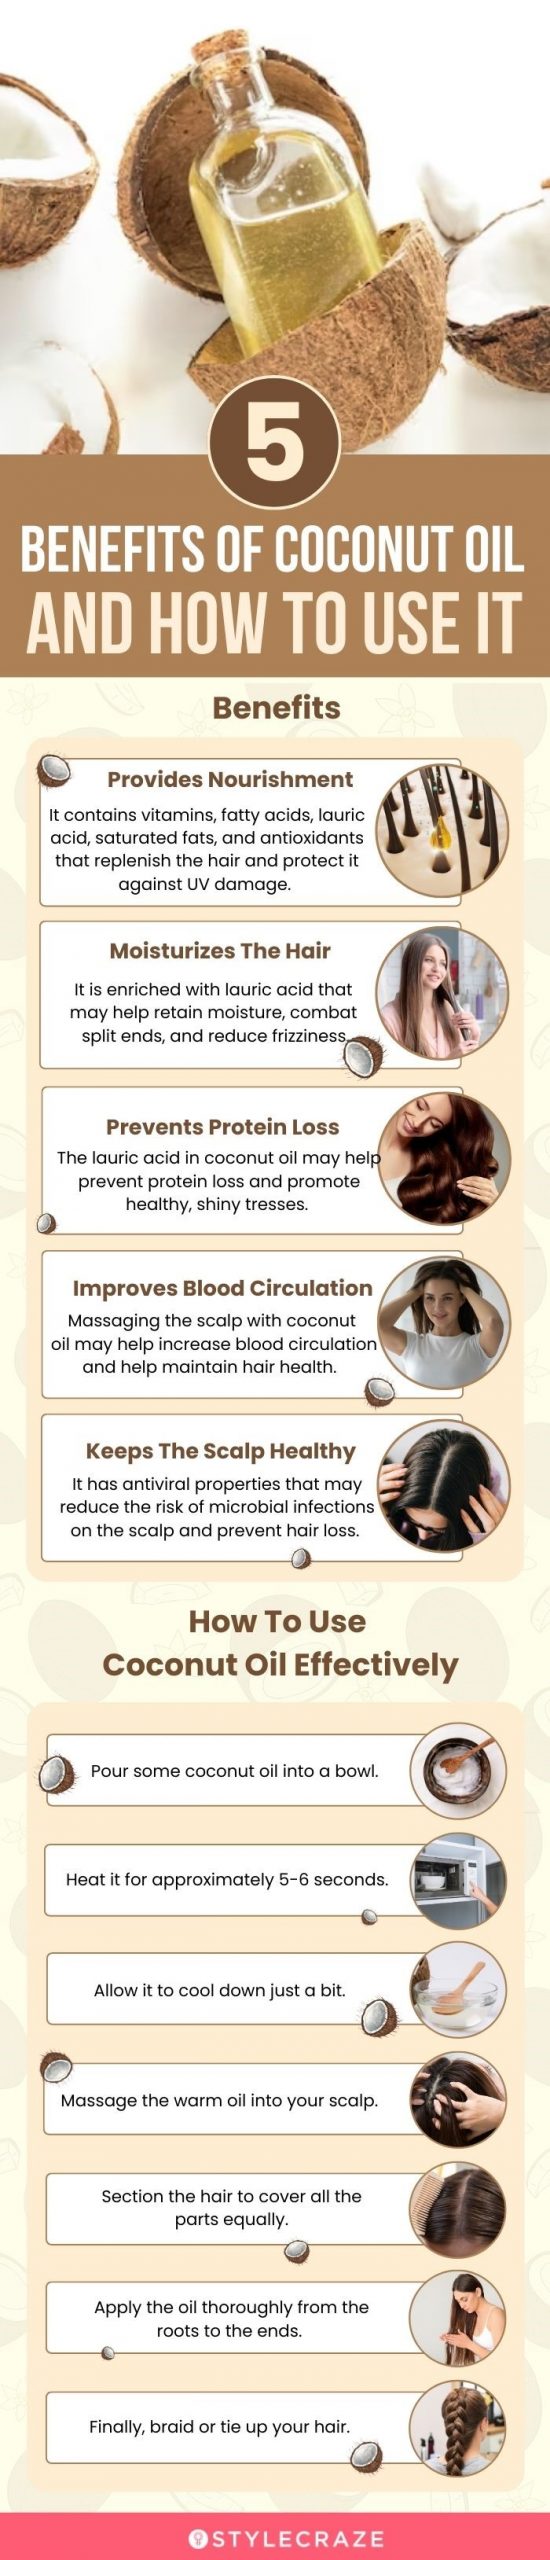 5 coconut oil benefits and how to use it (infographic)